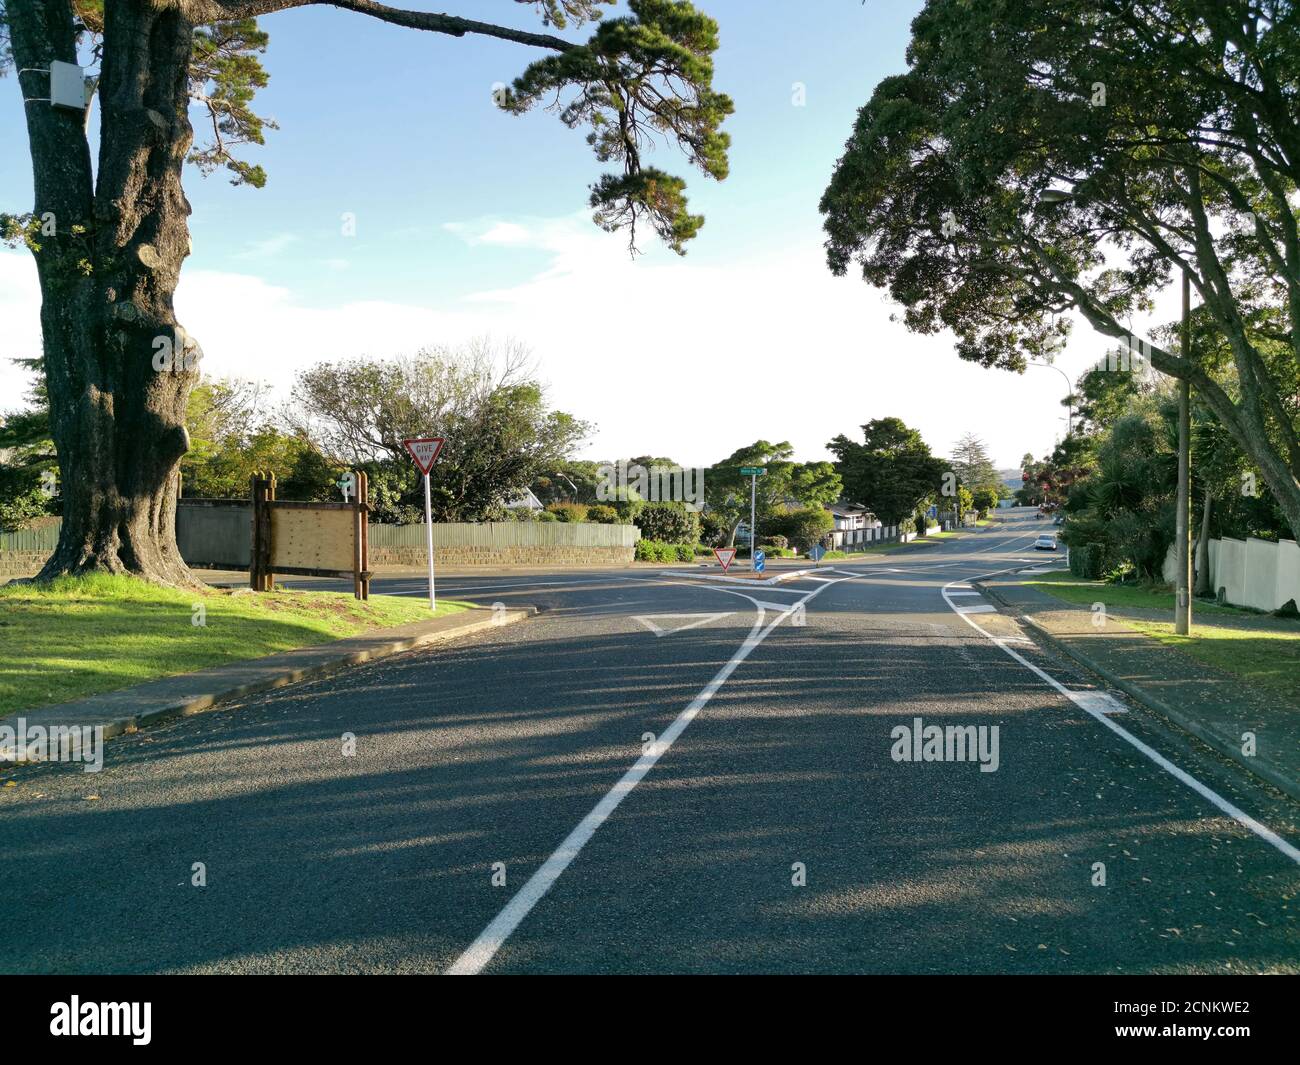 AUCKLAN, NEW ZEALAND - Apr 21, 2019: Auckland / New Zealand - April 21 2019: View of Howick Stockade Hill from Ridge Road and Mellons Bay Road interse Stock Photo